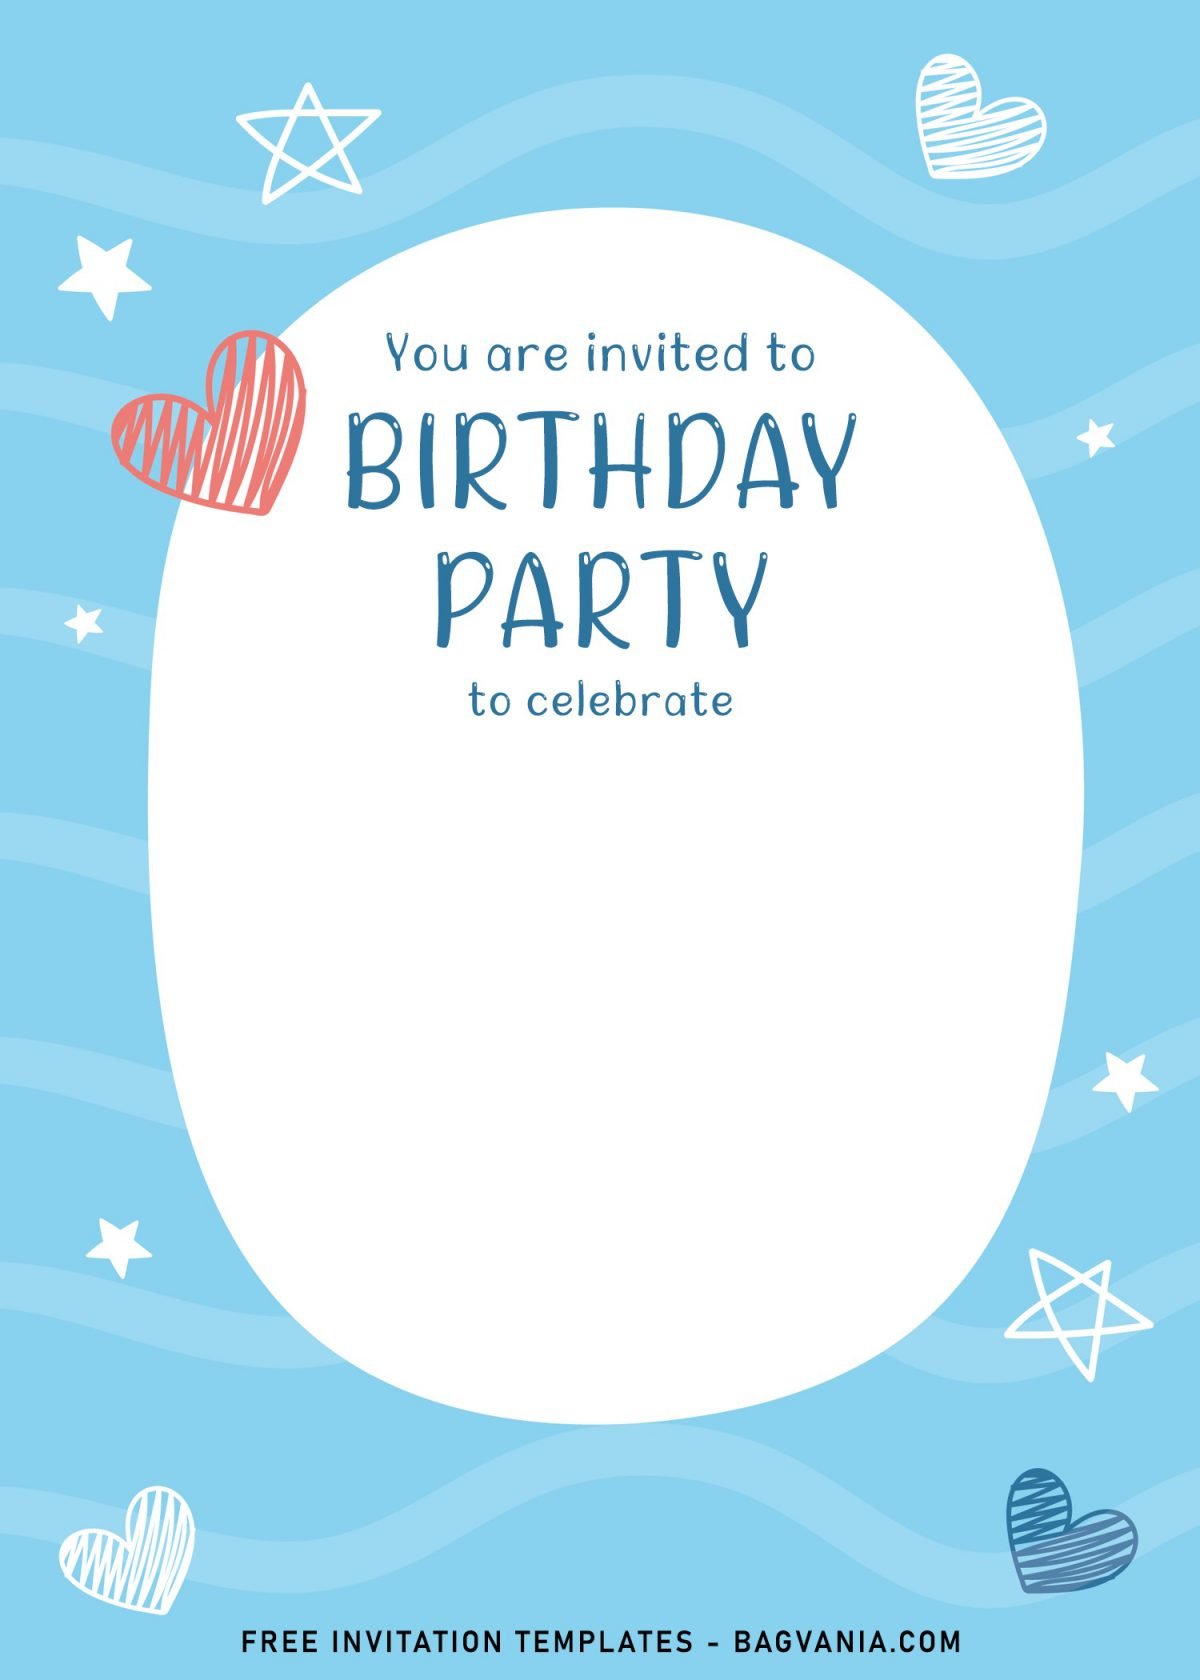 7+ Cute And Fun Birthday Invitation Templates For Kids Birthday Party and has 